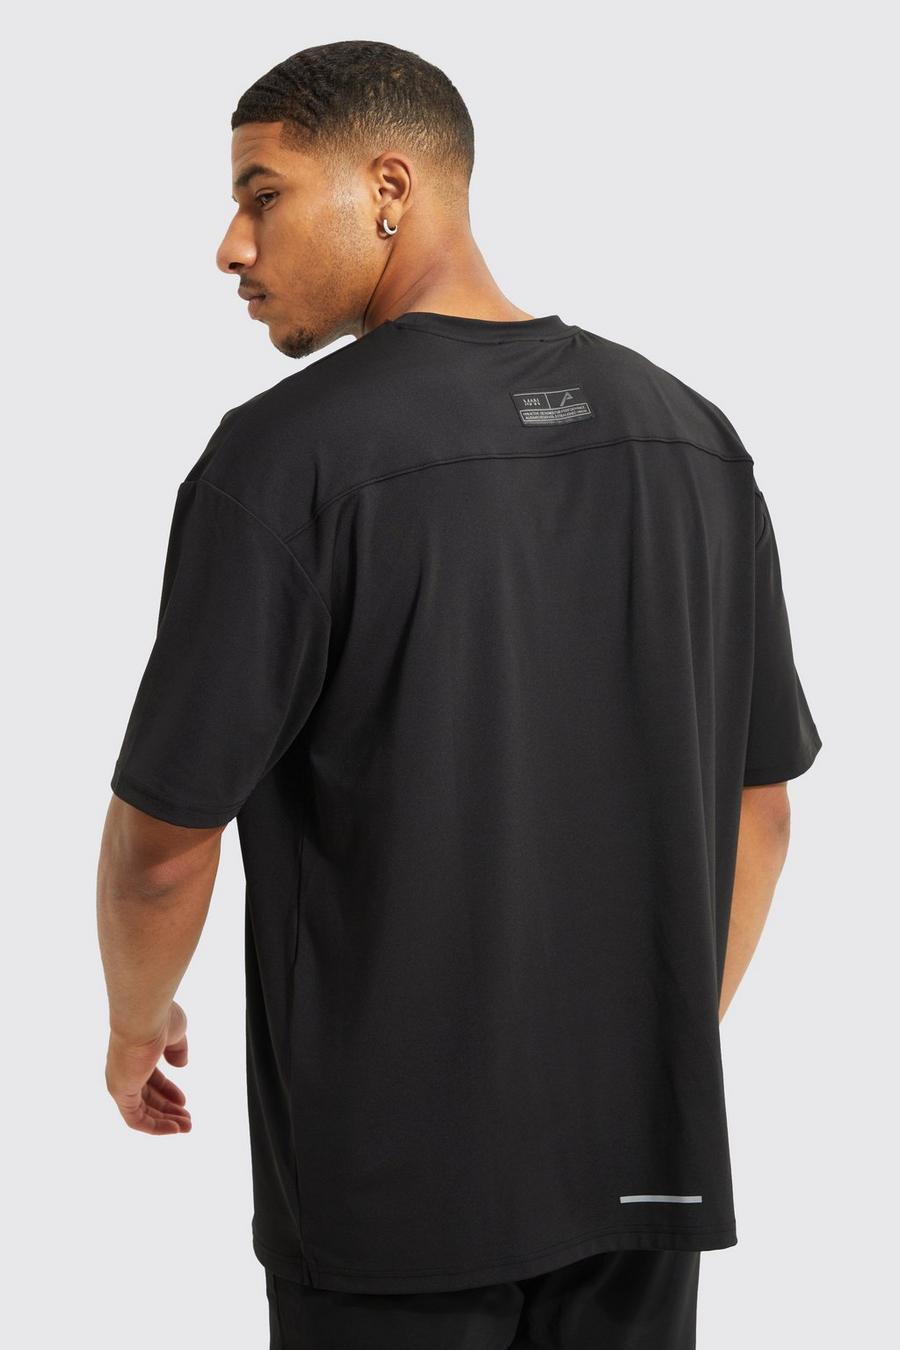 Black Tall Oversized Man Performance Fitness T-Shirt image number 1